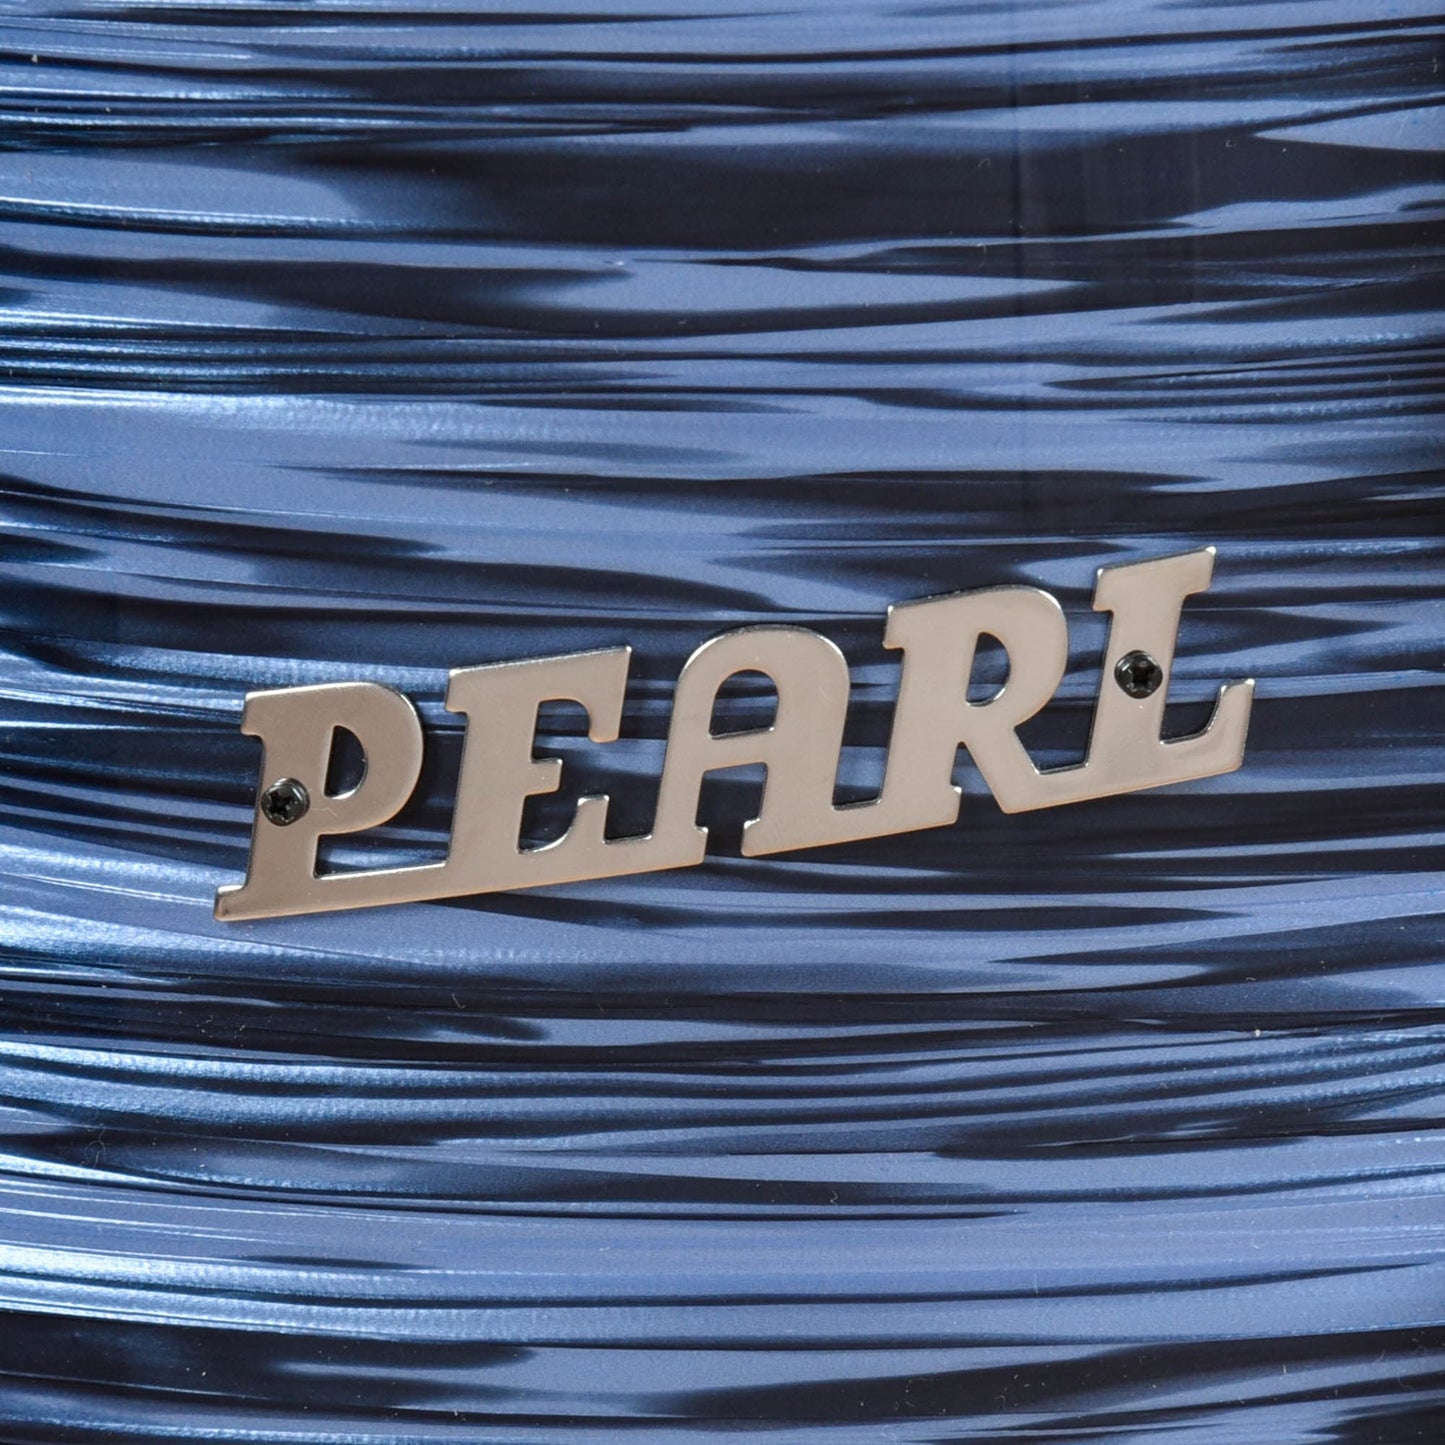 Pearl President Series Deluxe 4pc. Drum Kit Ocean Ripple USED 12/14/20/6.5x14 USED Drums and Percussion / Acoustic Drums / Full Acoustic Kits